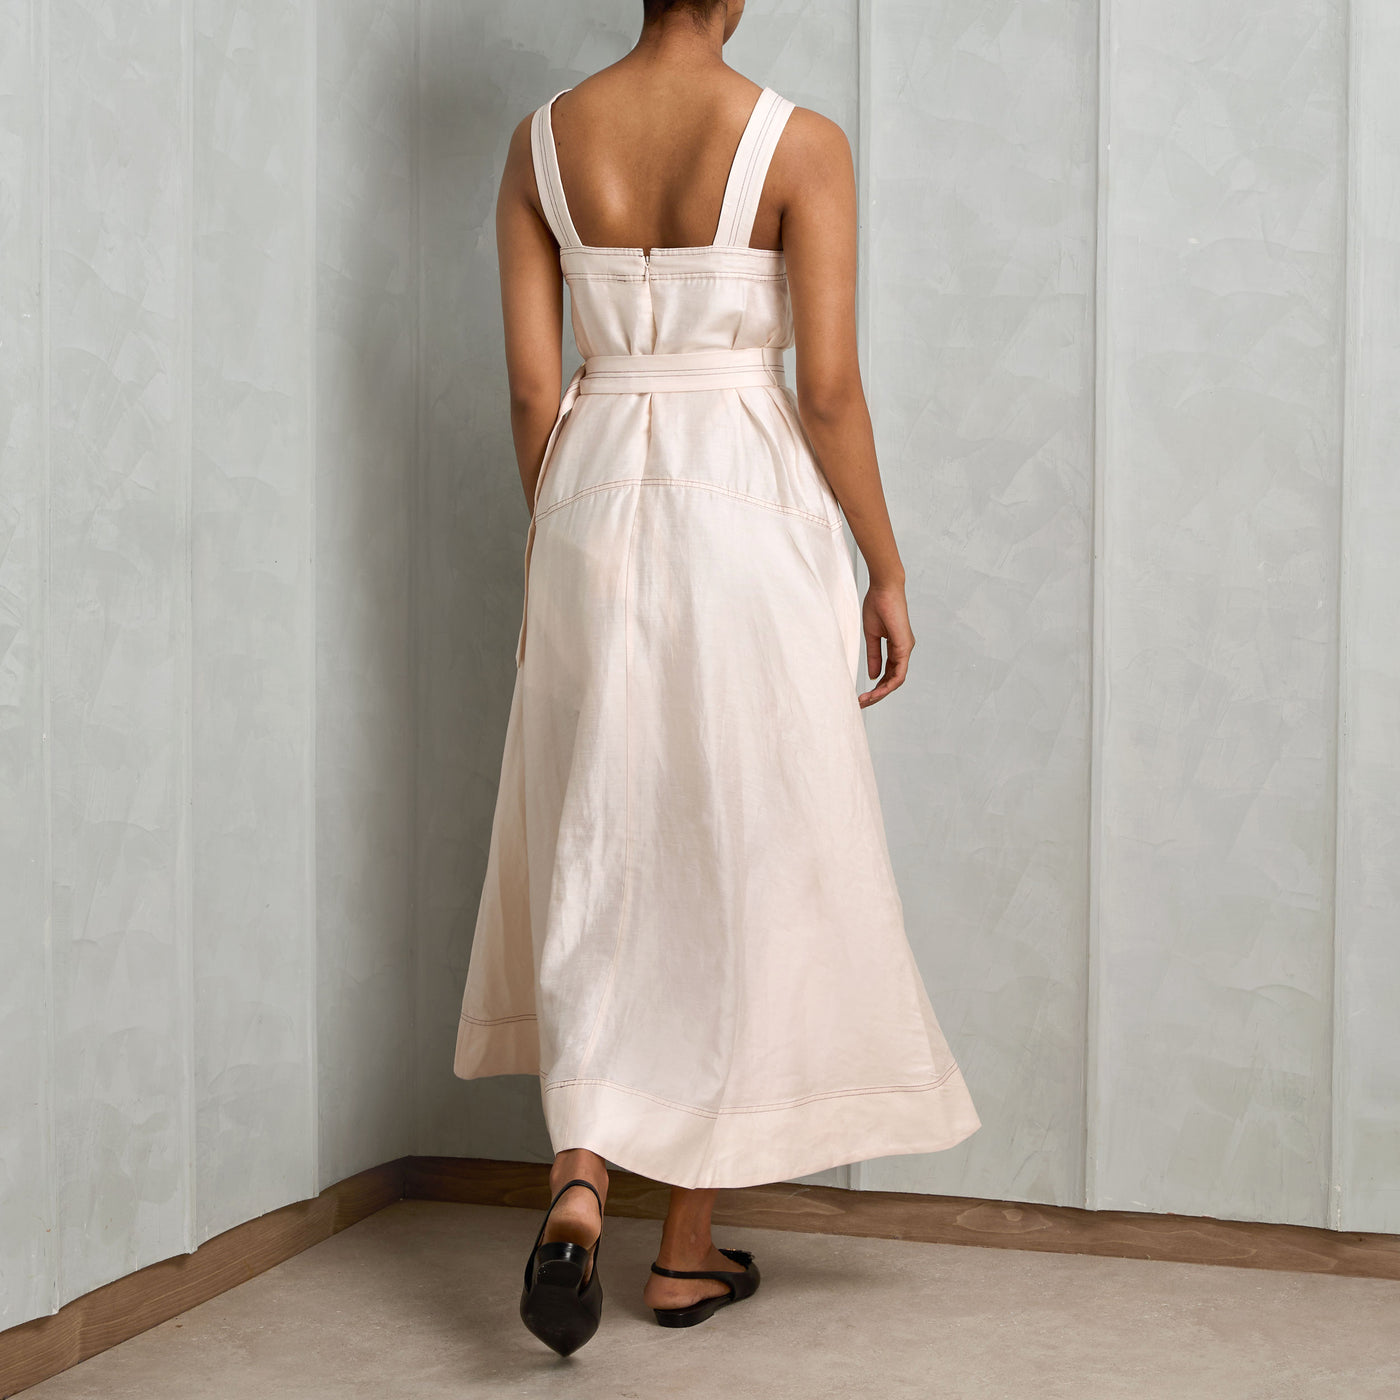 ACLER belted olmstead white dress